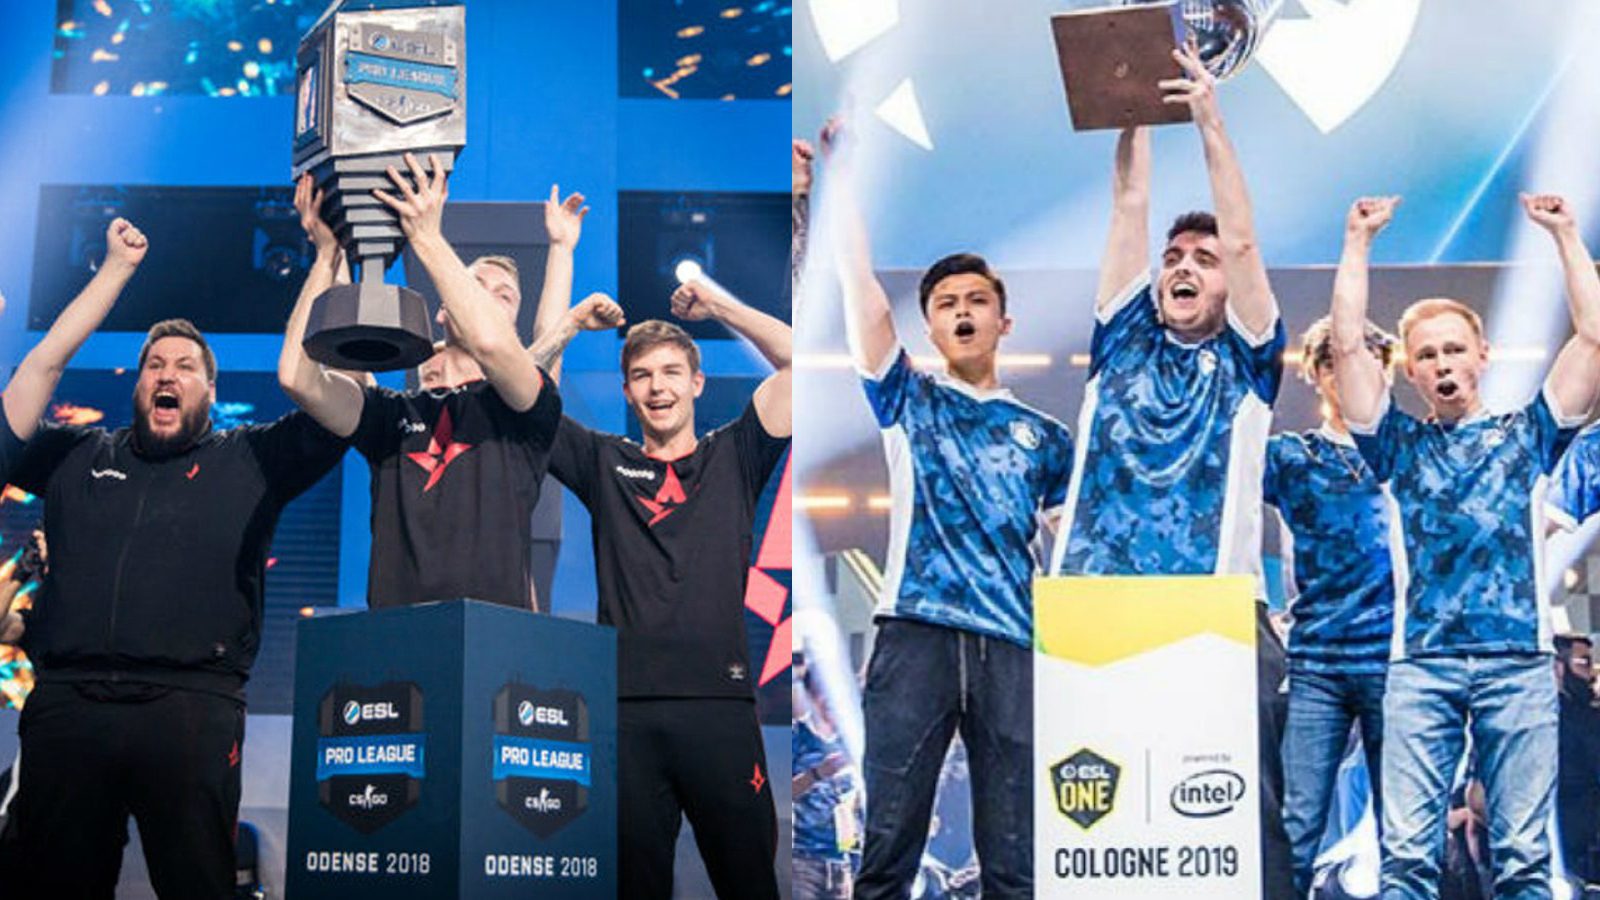 South.gg - TRIVIA‼ A gold bar is rewarded to each member of the CS:GO team  that wins the Intel Grand Slam along with the $1,000,000 grand prize.